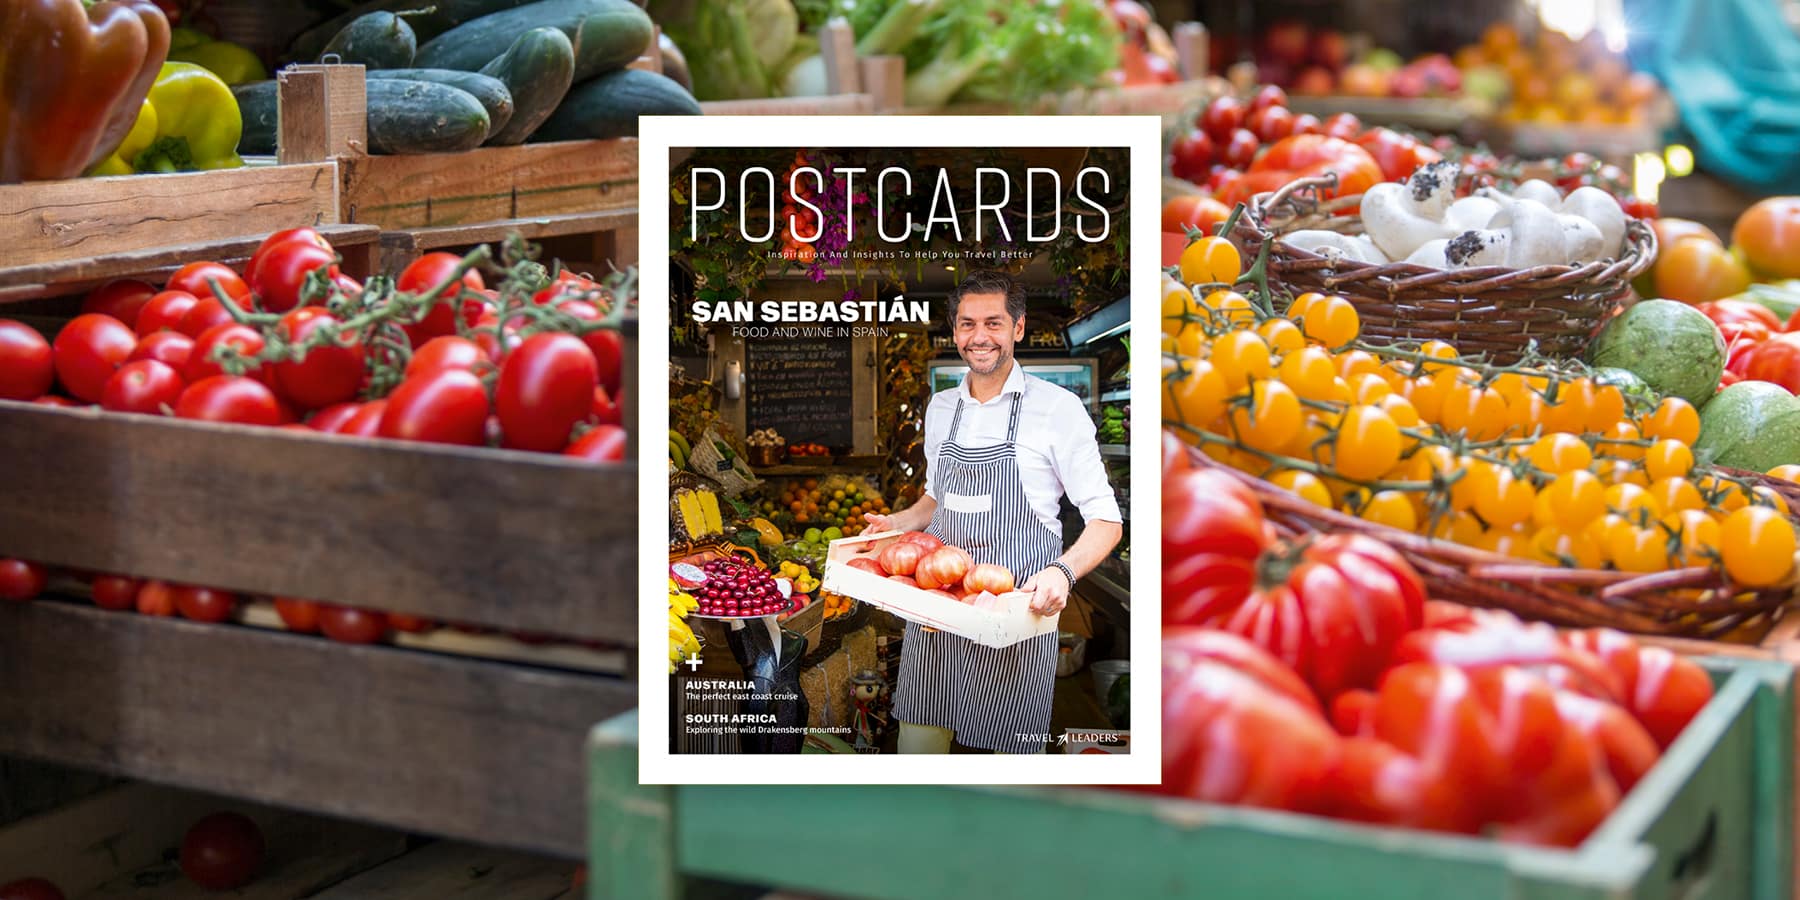 The Fall issue of Postcards is now available